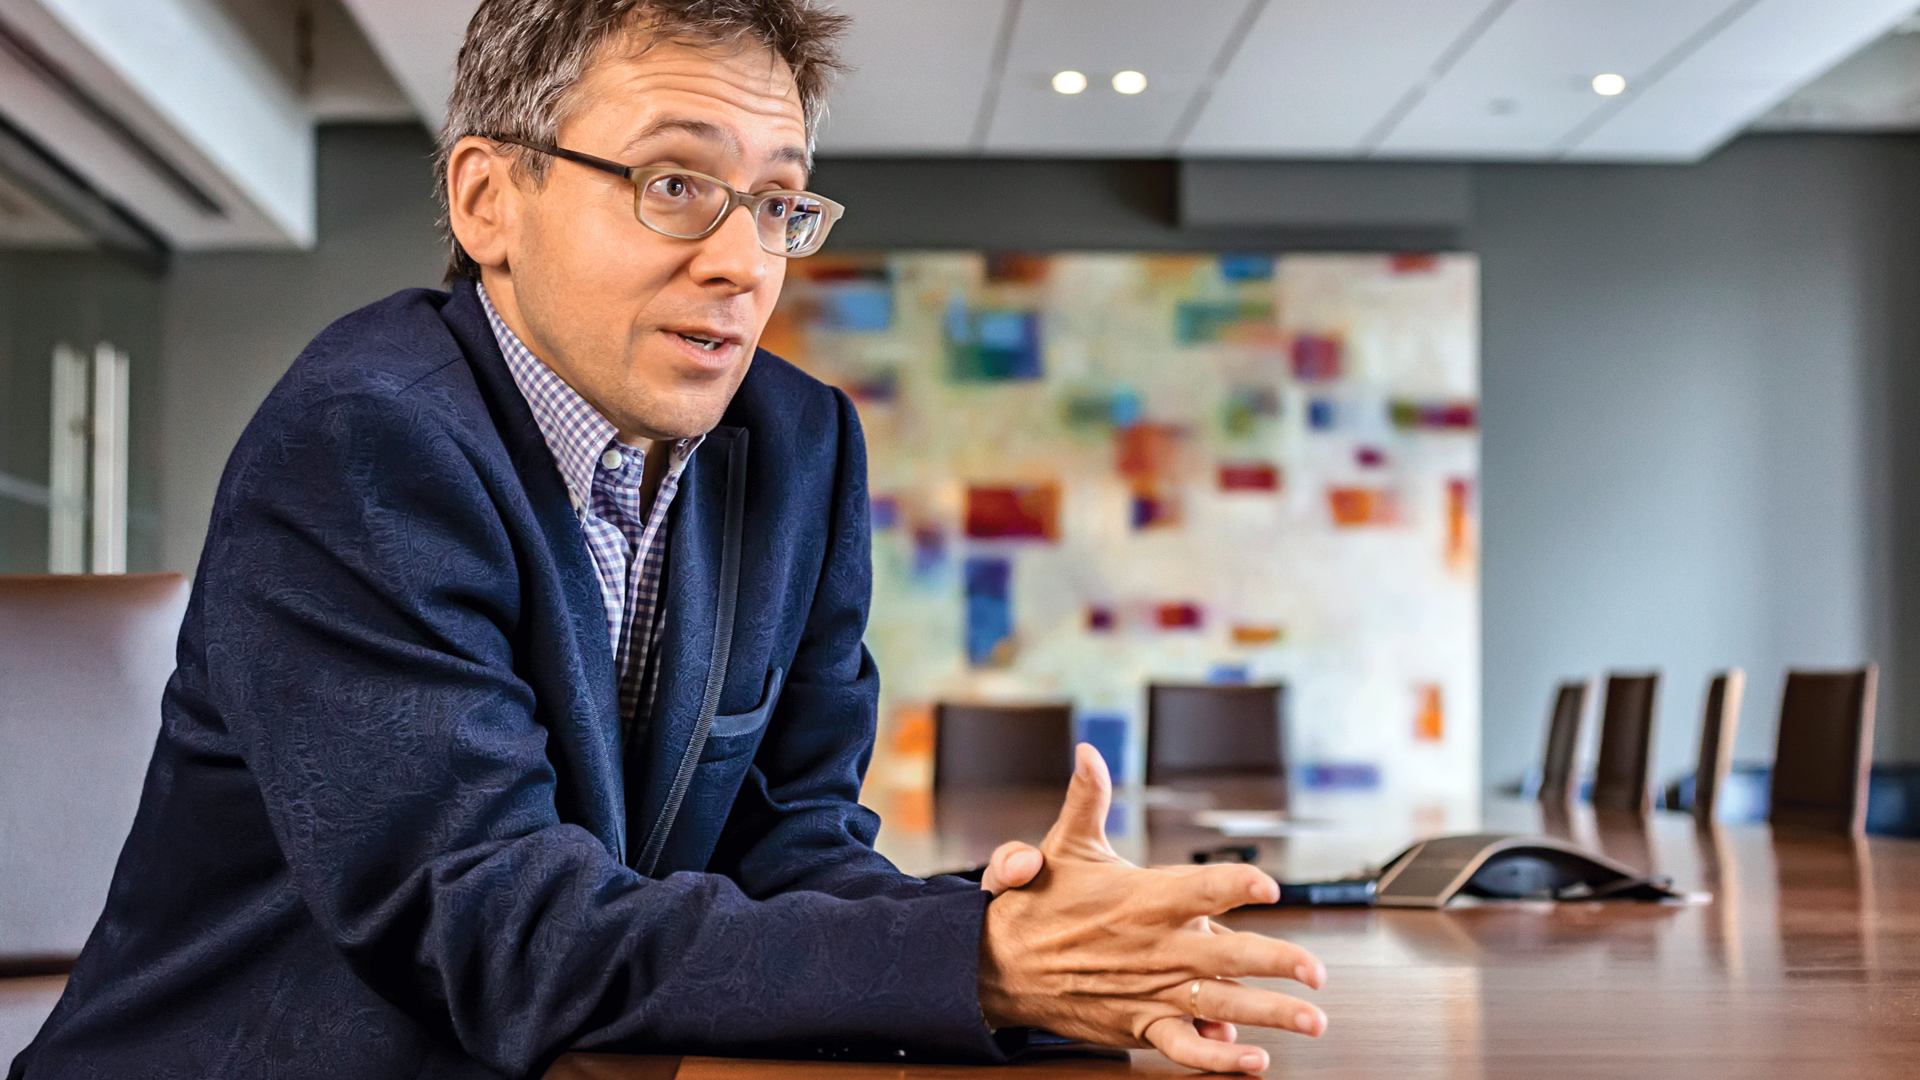 Ian Bremmer inside the Eurasia Group Headquarters on 5th Avenue in Midtown New York